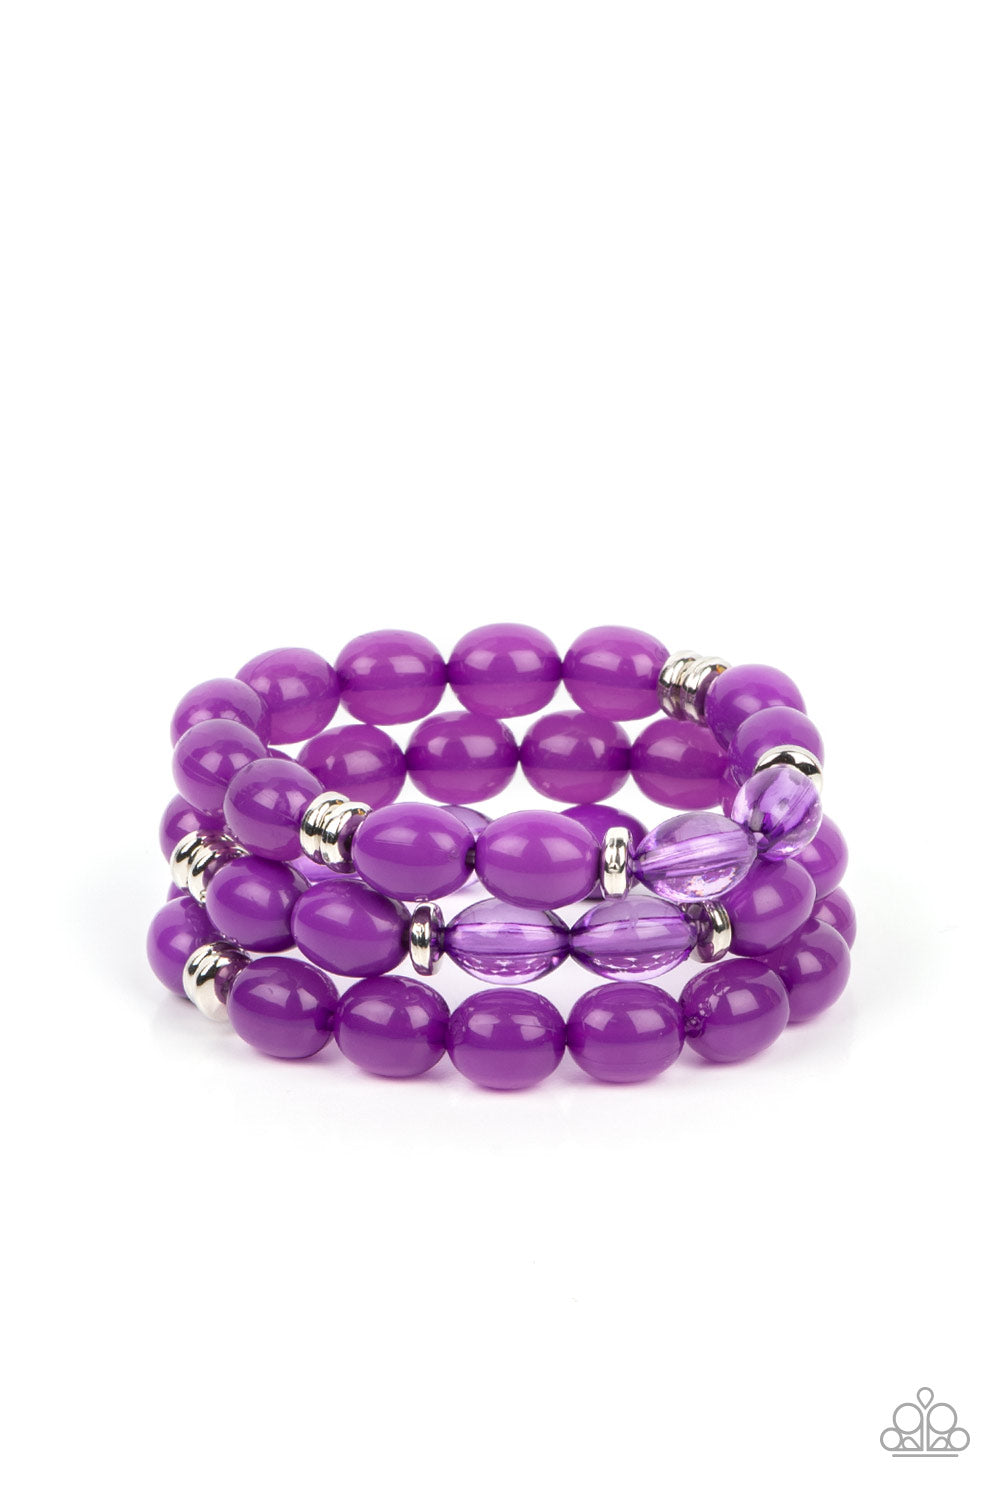 Coastal Coastin - Purple and Silver Stetchy Bracelet - Paparazzi Accessories - Silver accents, rows of glassy, opaque and acrylic purple beads are threaded along stretchy bands around the wrist, resulting in vivacious layer bracelets. Trendy fashion jewelry for everyone.